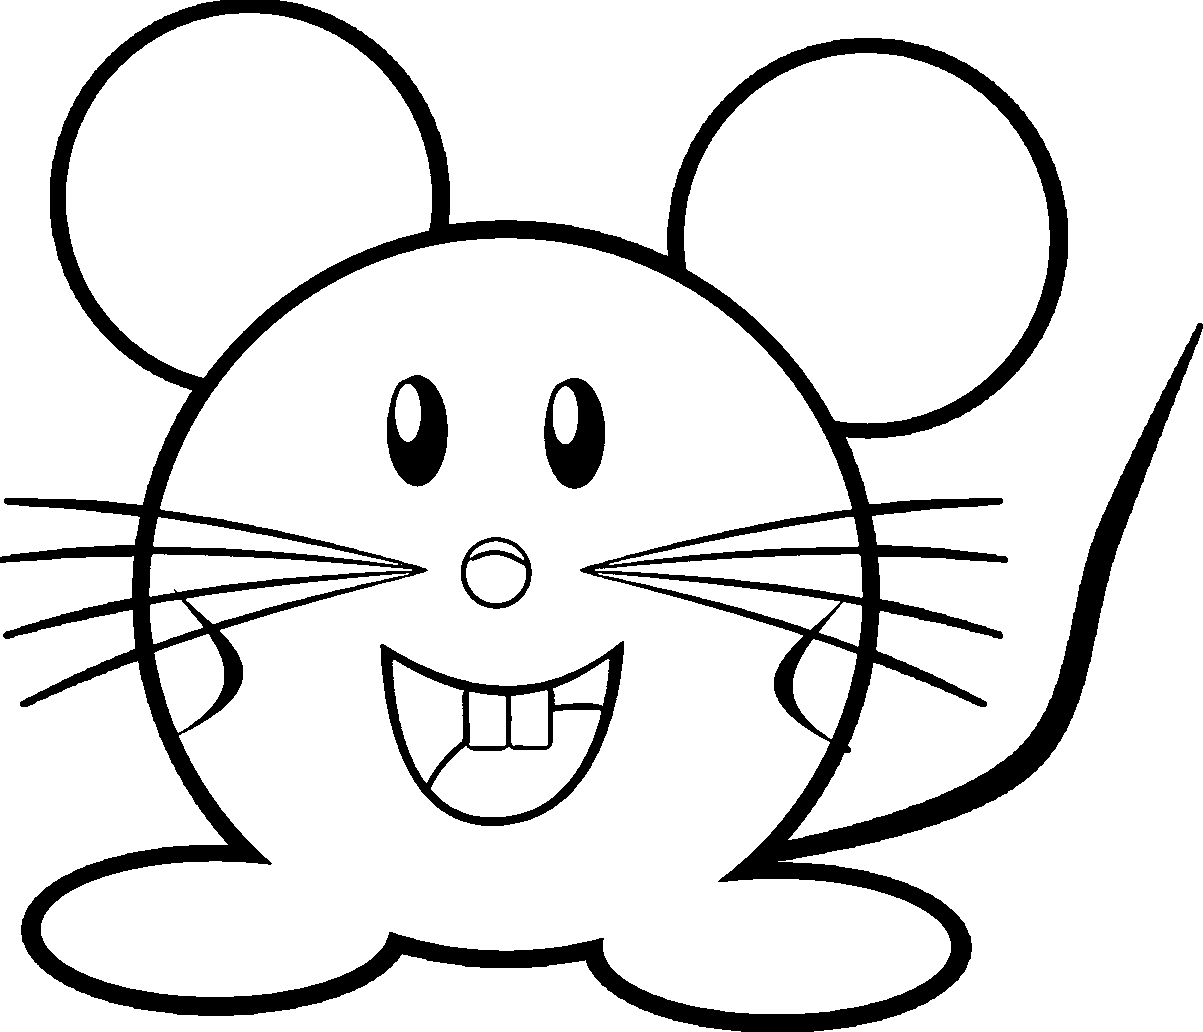 Mice Coloring Page - Coloring Home